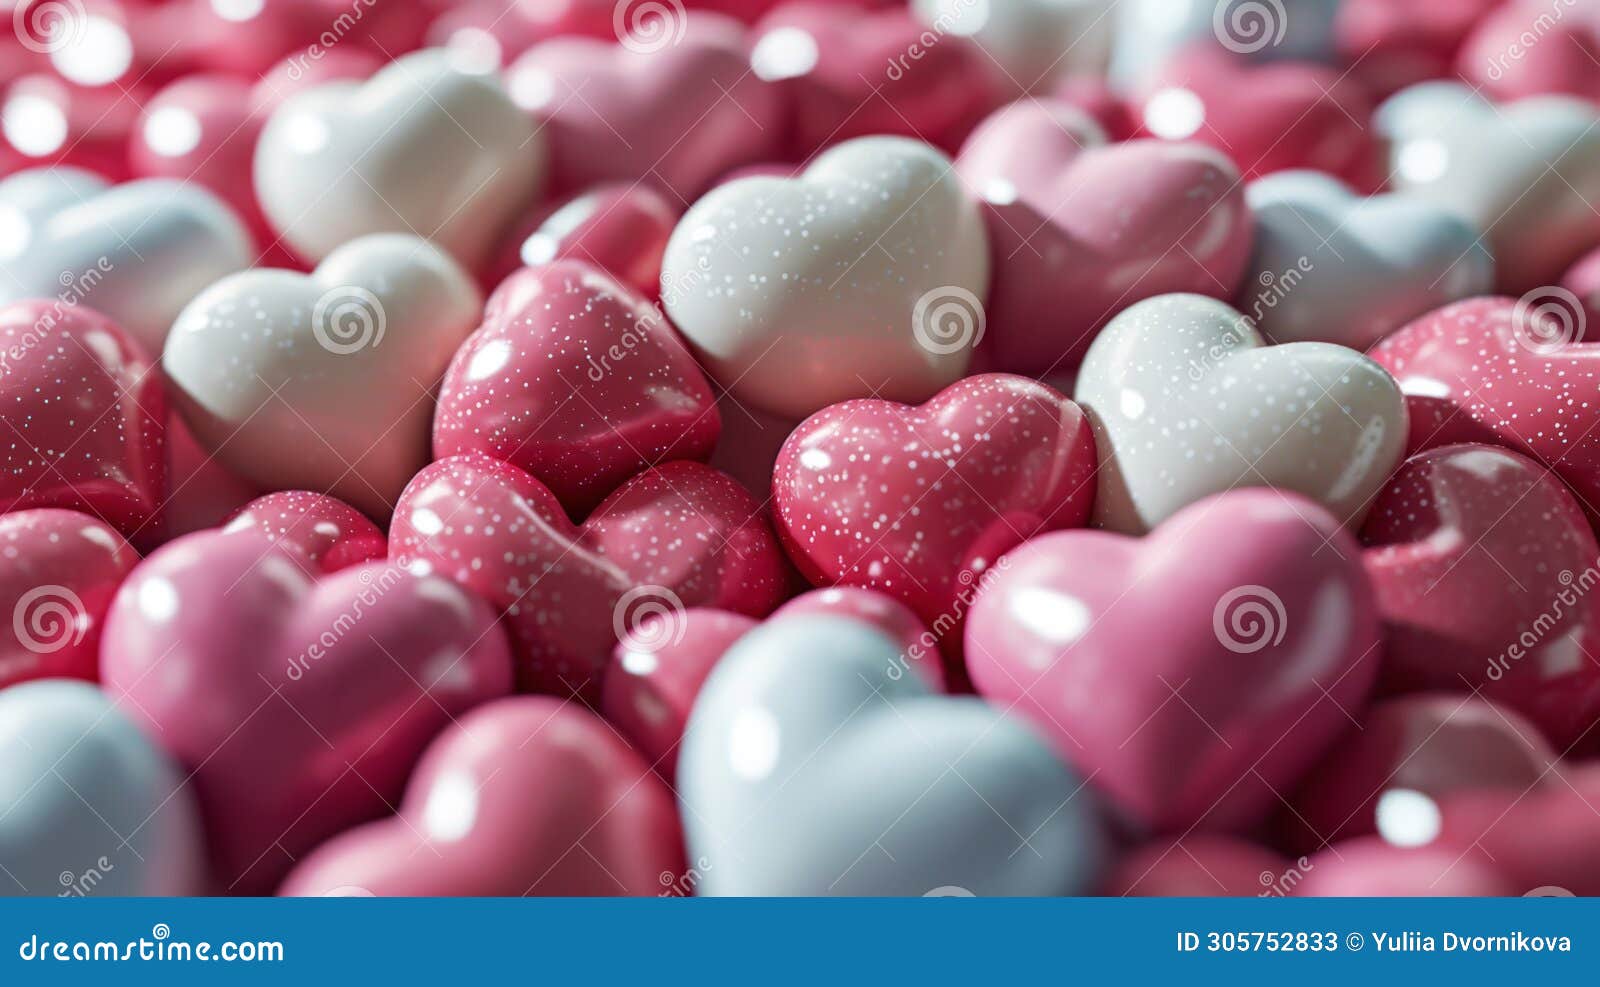 Pink and White Aesthetic Heart Figures. Pastel Colours. Romantic Love  Background Stock Image - Image of color, heart: 305752833